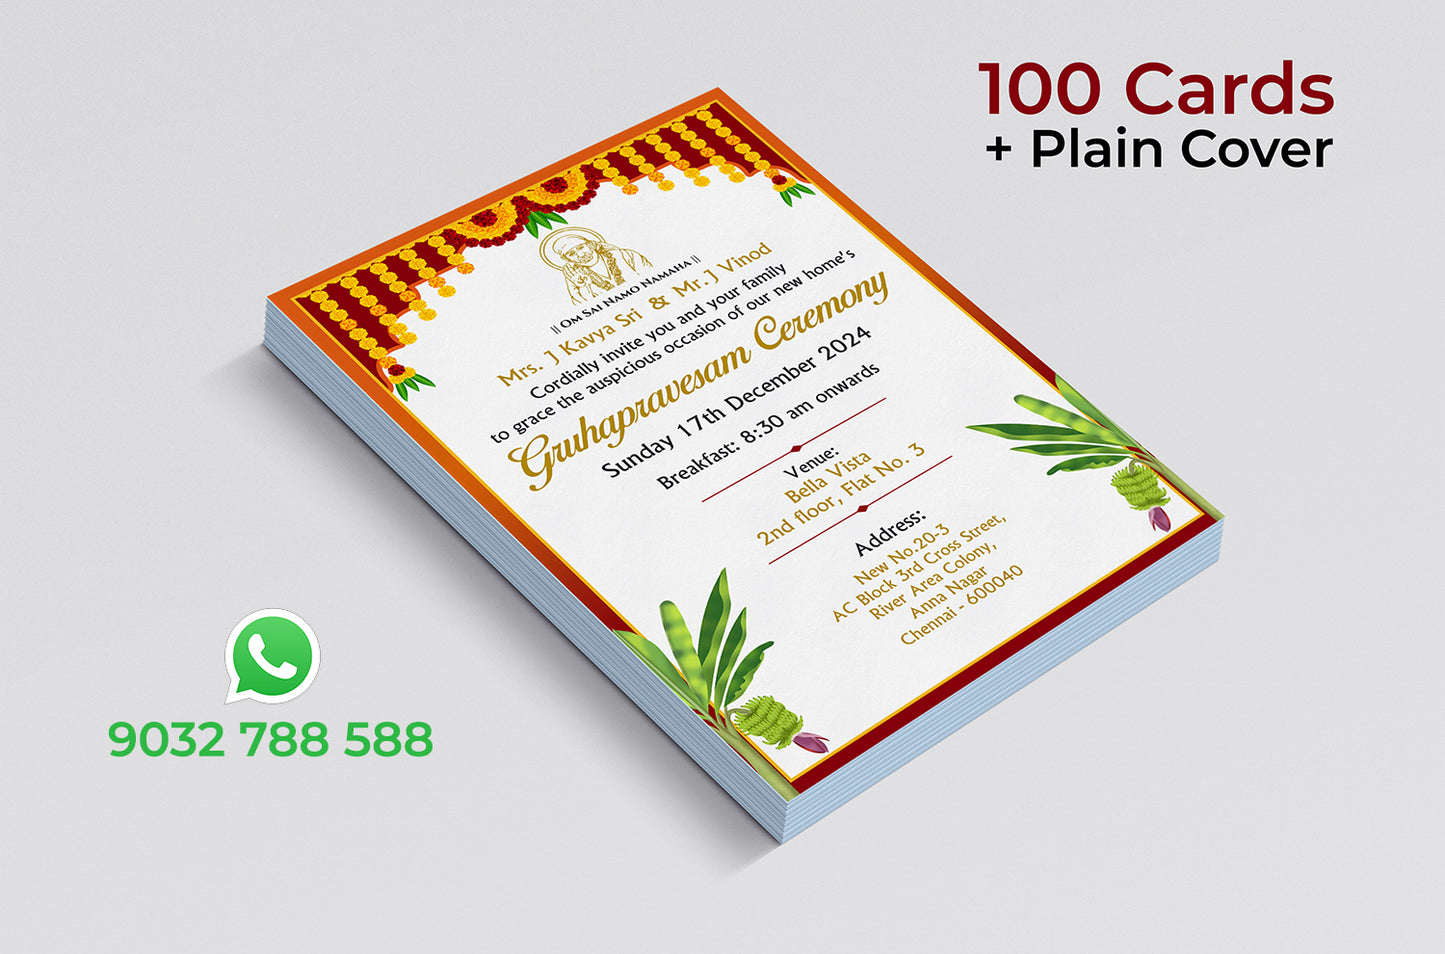 Traditional Gruhapravesam Ceremony Card Template with Sai Bab Template